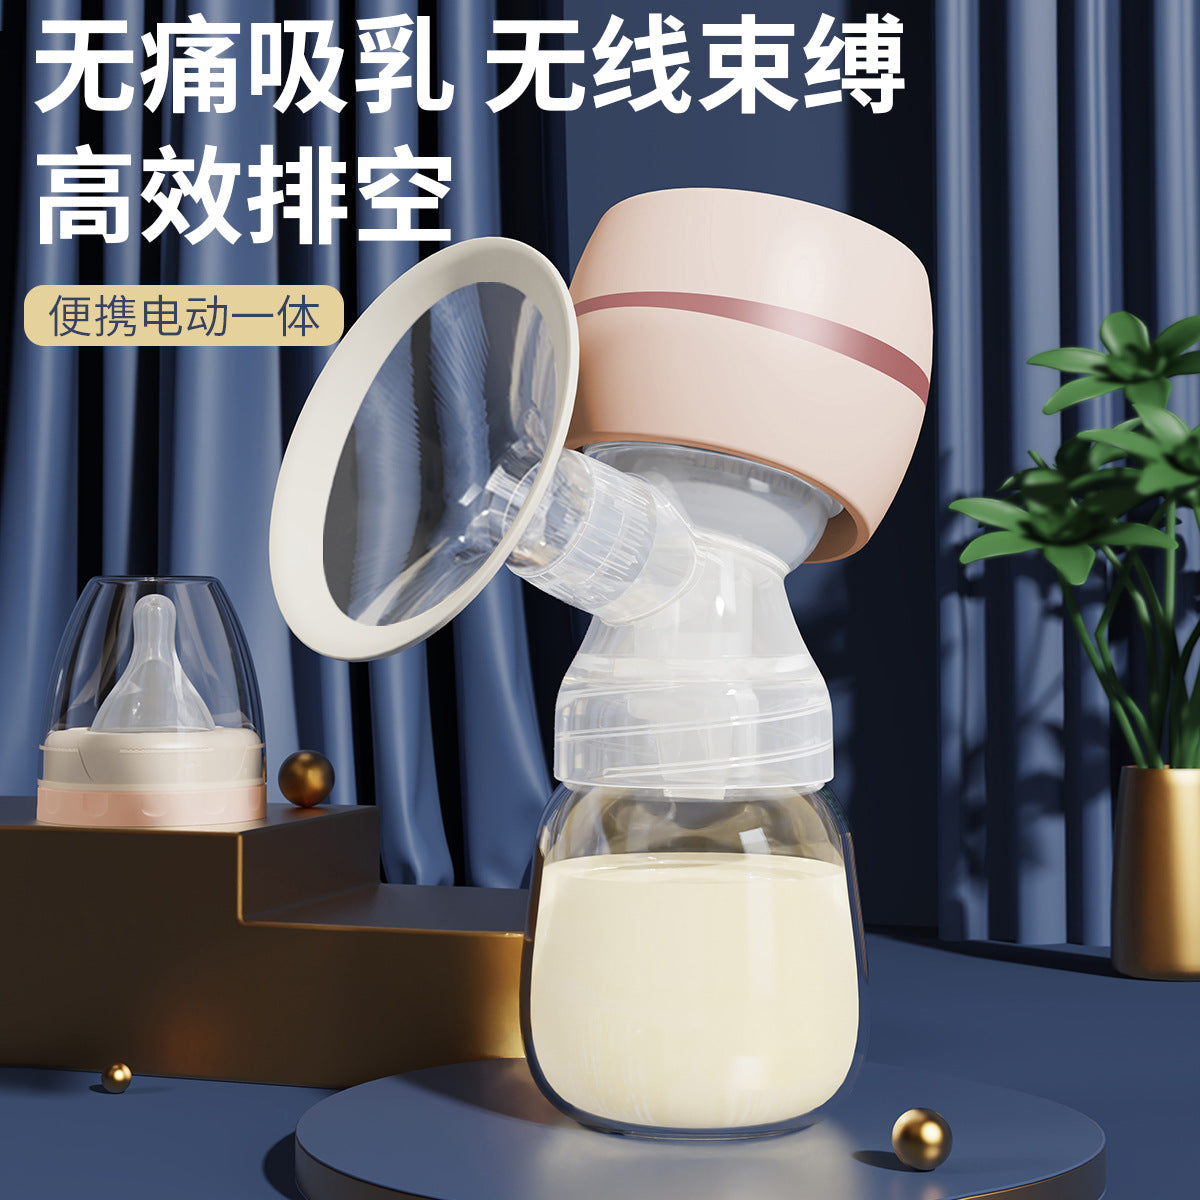 Zhibao electric breast pump intelligent all-in-one fully automatic large suction milking machine massage painless silent breast pump